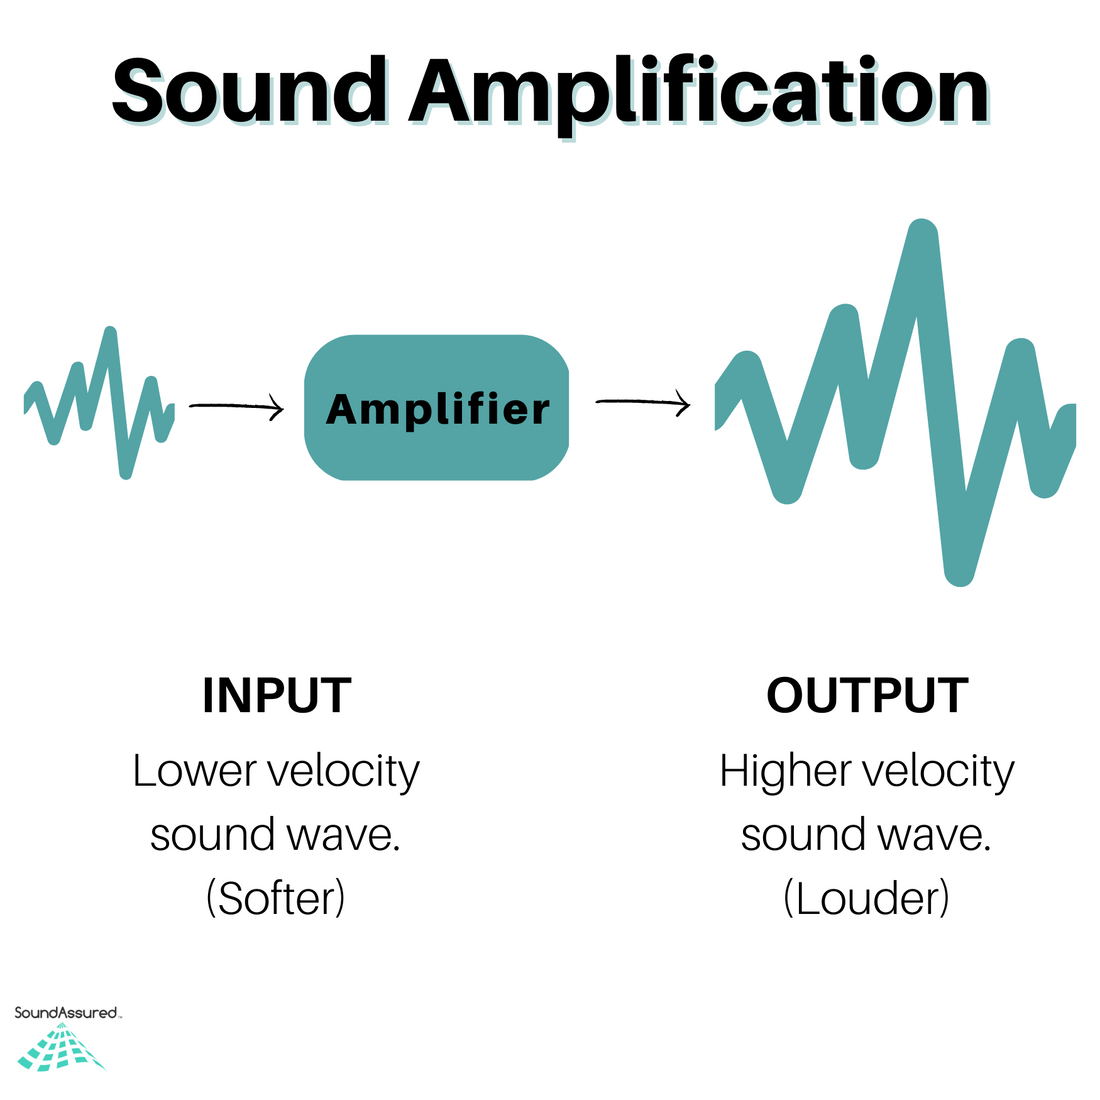 Info graphic showing how sound amplification works by turning a low velocity sound wave into a high velocity sound wave that is louder and easier to hear.